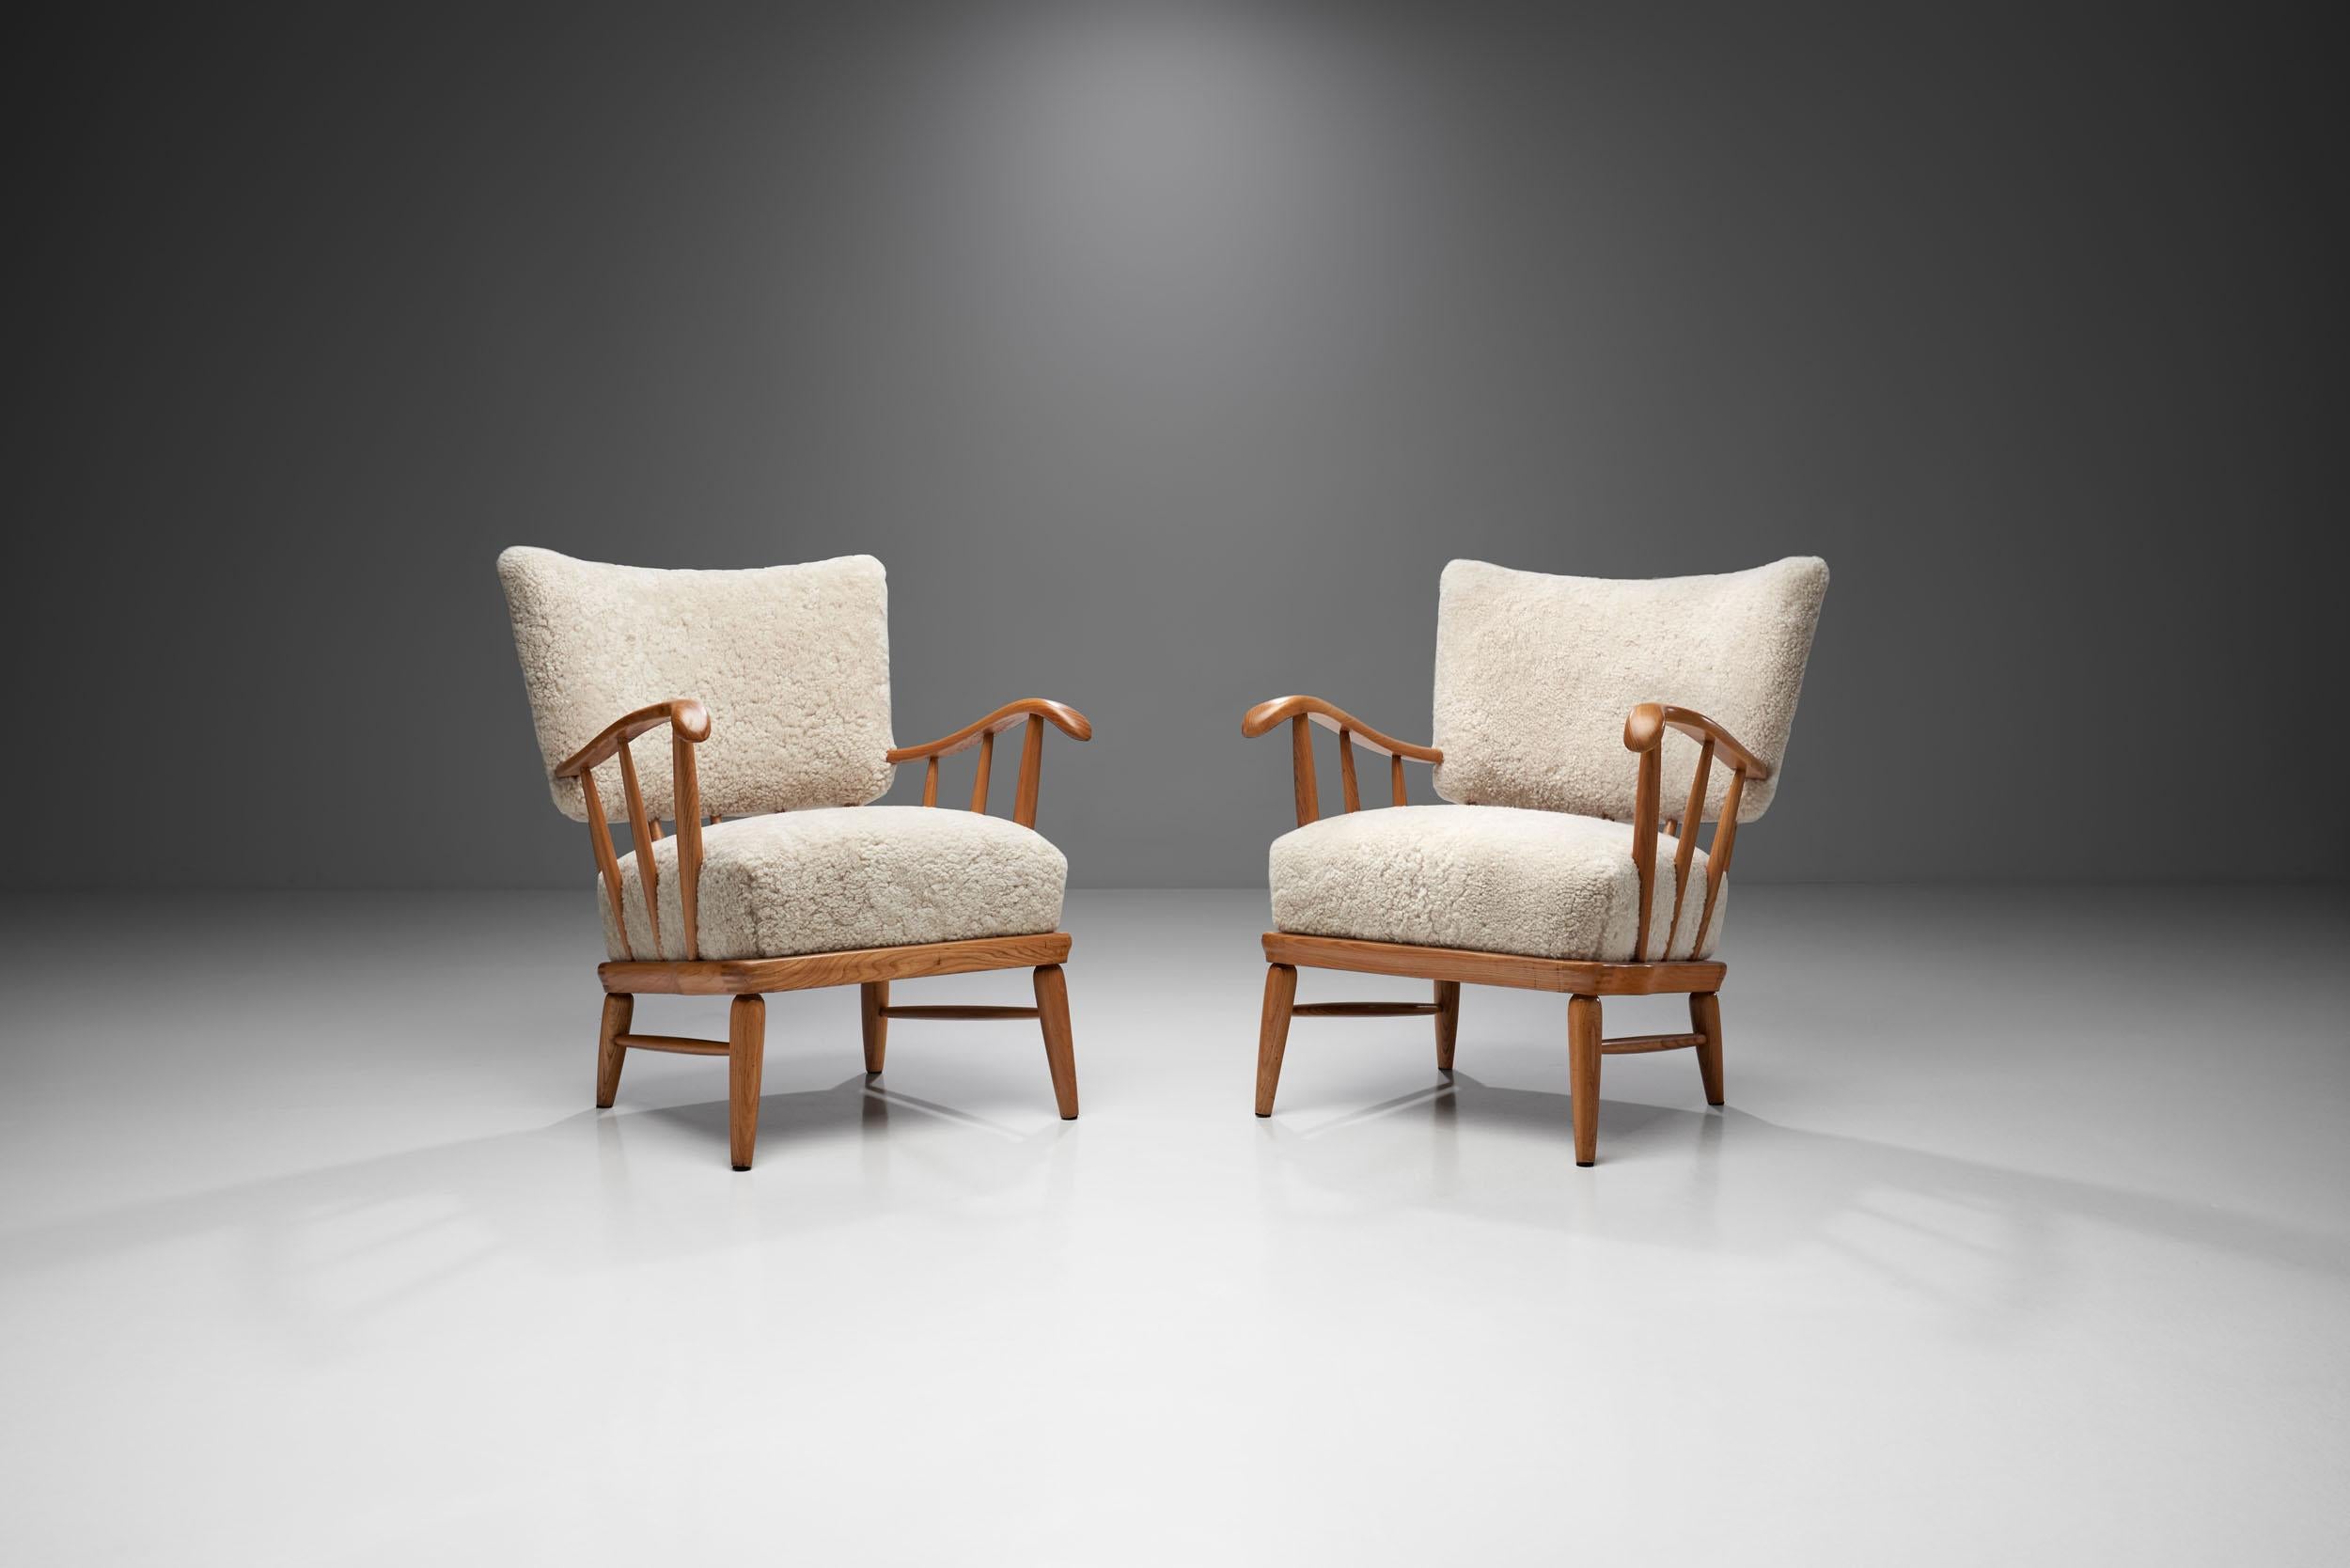 Though their country has a long tradition of craftsmanship, for numerous reasons mid-century Norwegian designers never gained the same international renown as their peers in neighbouring nations. But as these gorgeous chairs show, when modernism